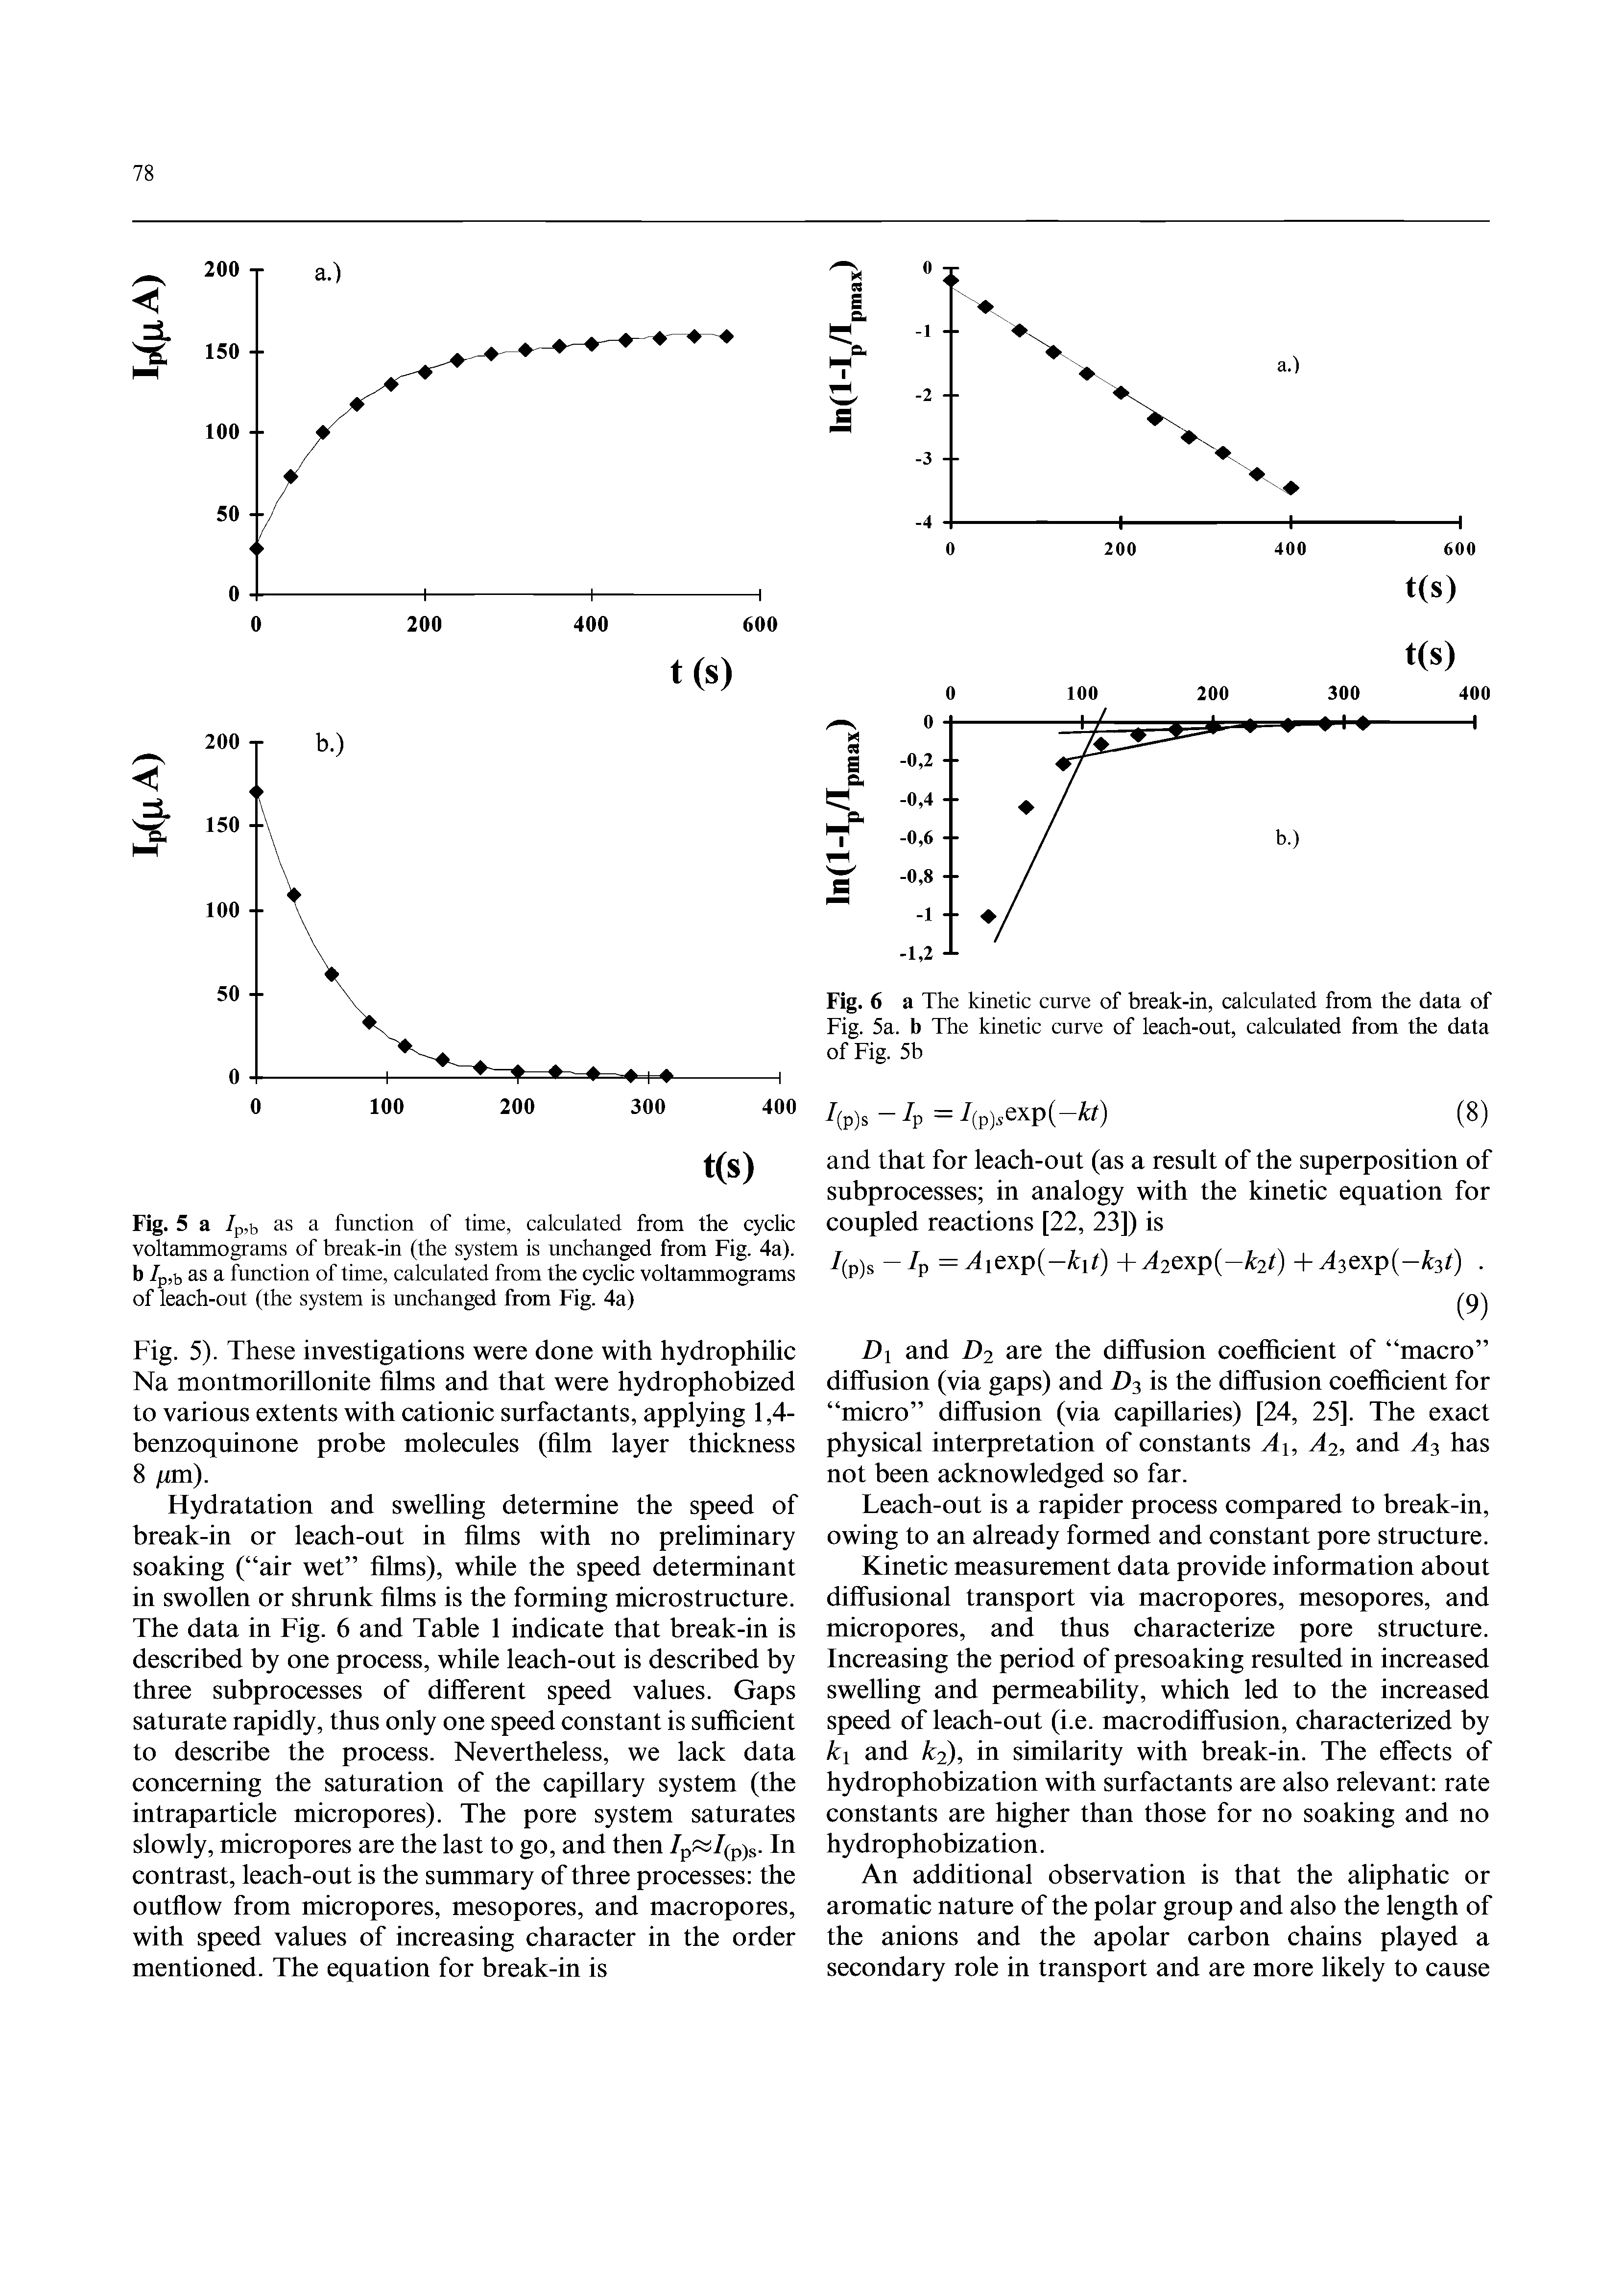 Fig. 5). These investigations were done with hydrophilic Na montmorillonite films and that were hydrophobized to various extents with cationic surfactants, applying 1,4-benzoquinone probe molecules (film layer thickness 8 lira).